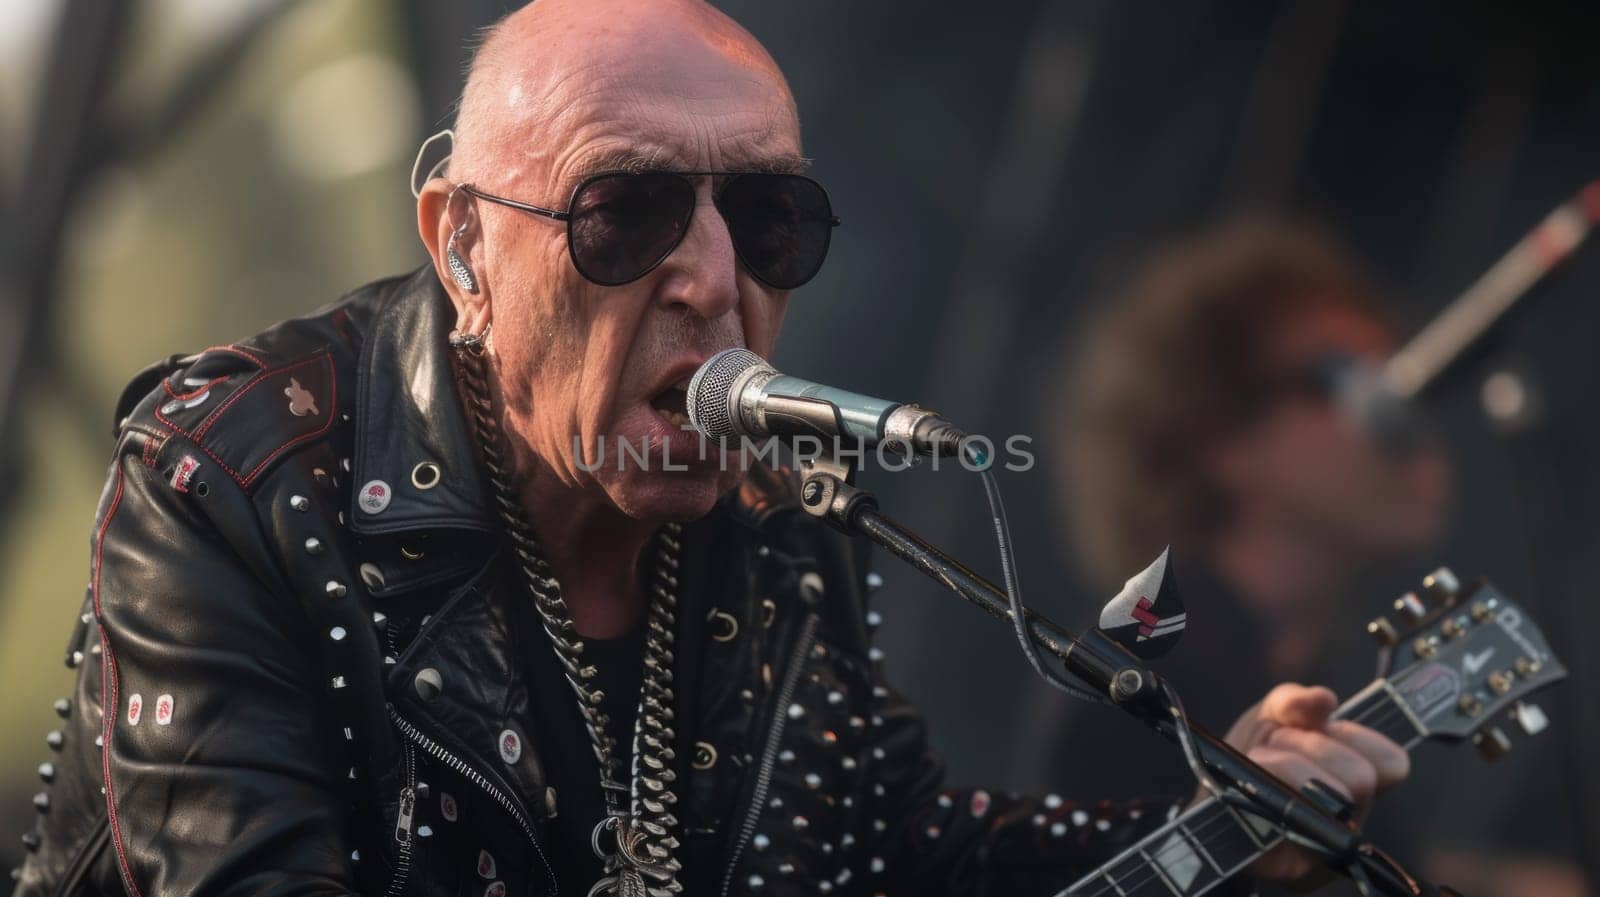 A man in leather jacket with sunglasses and a guitar